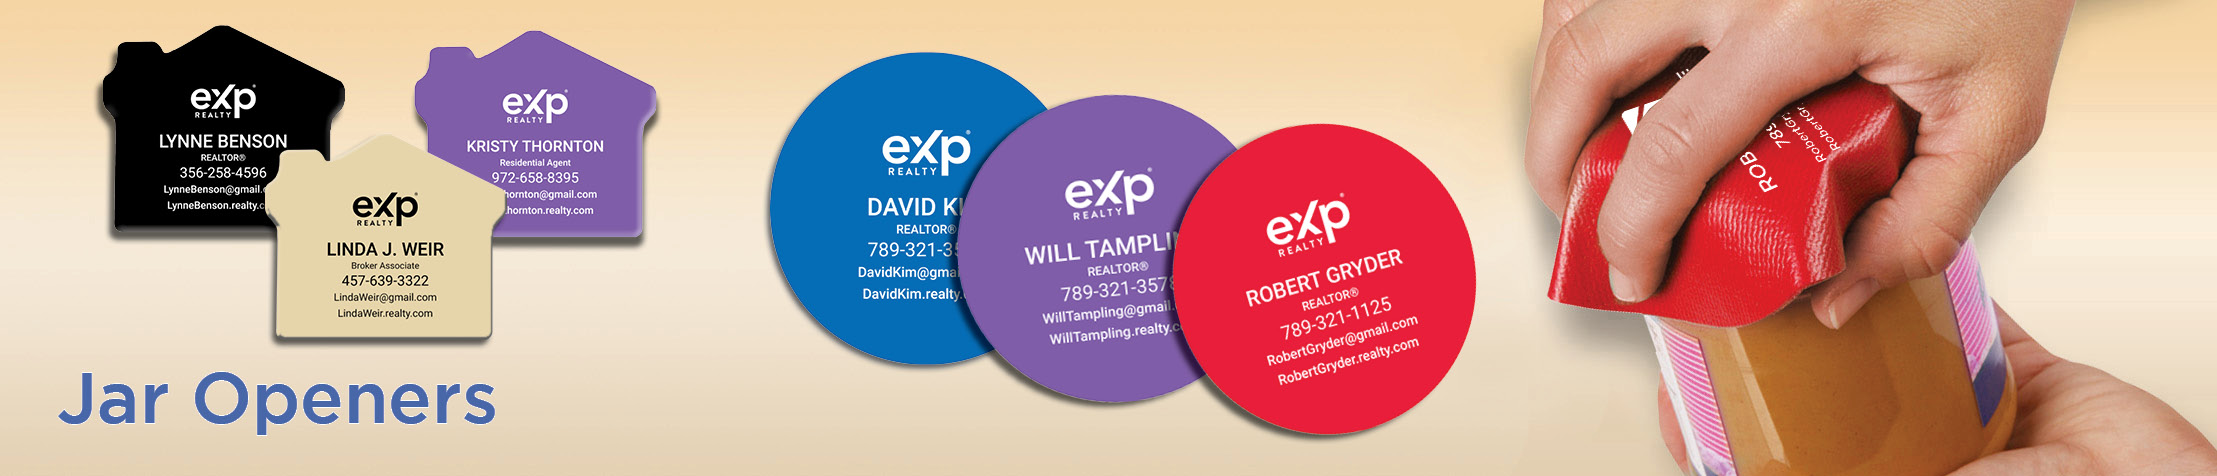 eXp Realty Real Estate Jar Openers - eXp Realty  personalized realtor promotional products | BestPrintBuy.com